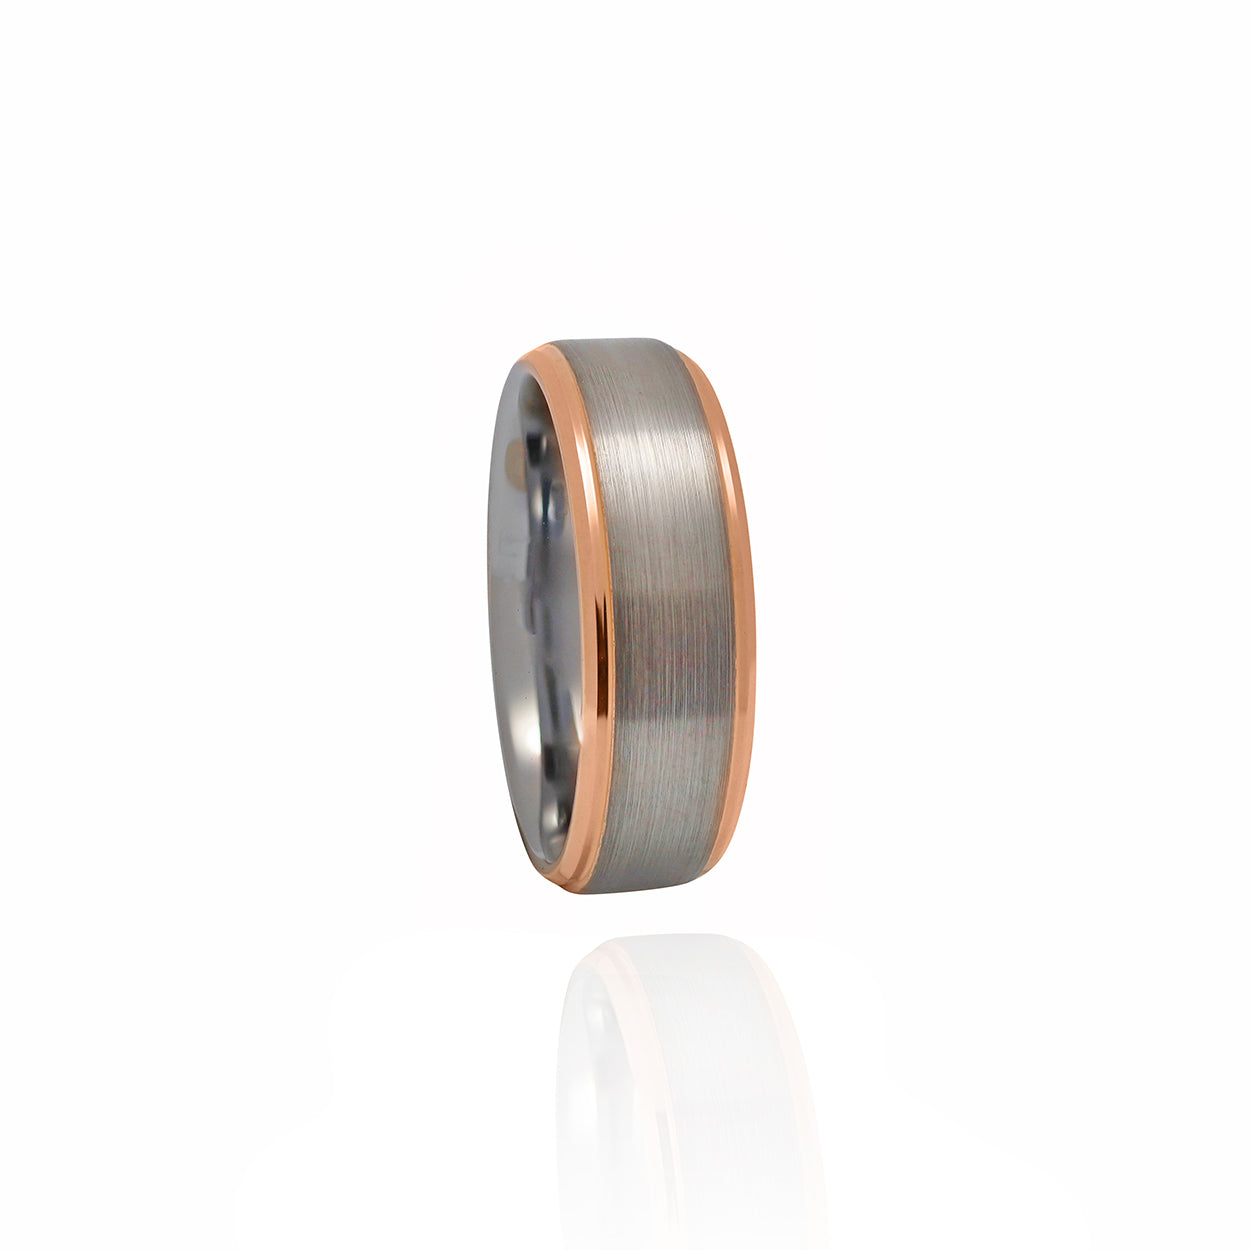 Satin Finished Tungsten Carbide Ring with Rose Gold Plated Edges